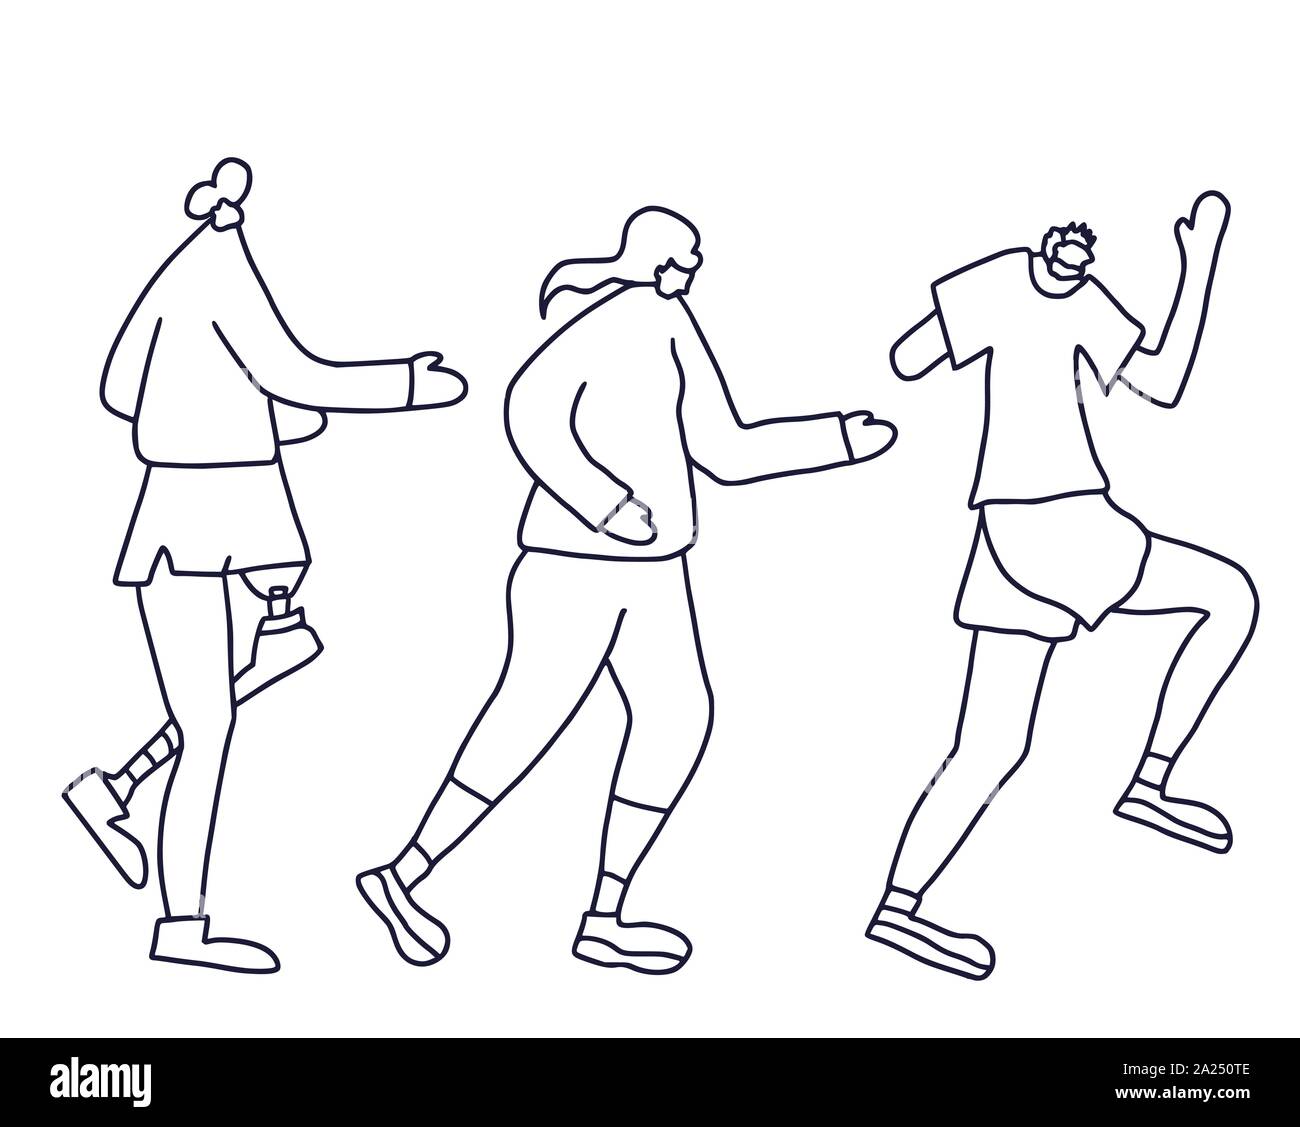 Runners. Different persons jogging isolated. Vector illustration in doodle style. Stock Vector